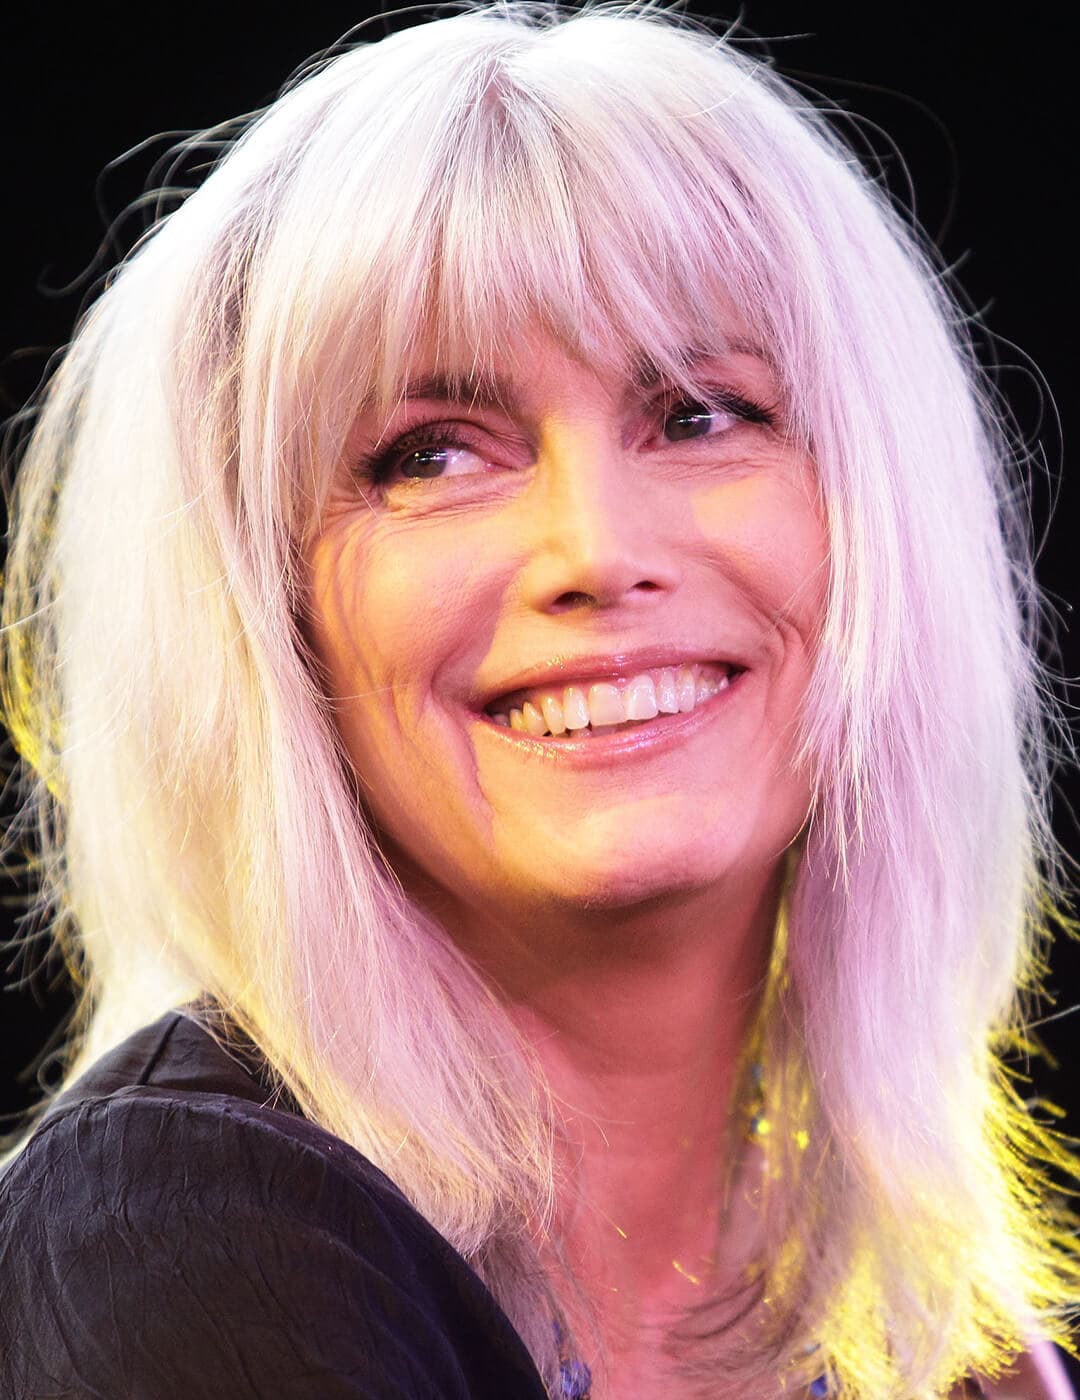 A photo of Emmylou Harris with a soft silvery white hairstyle